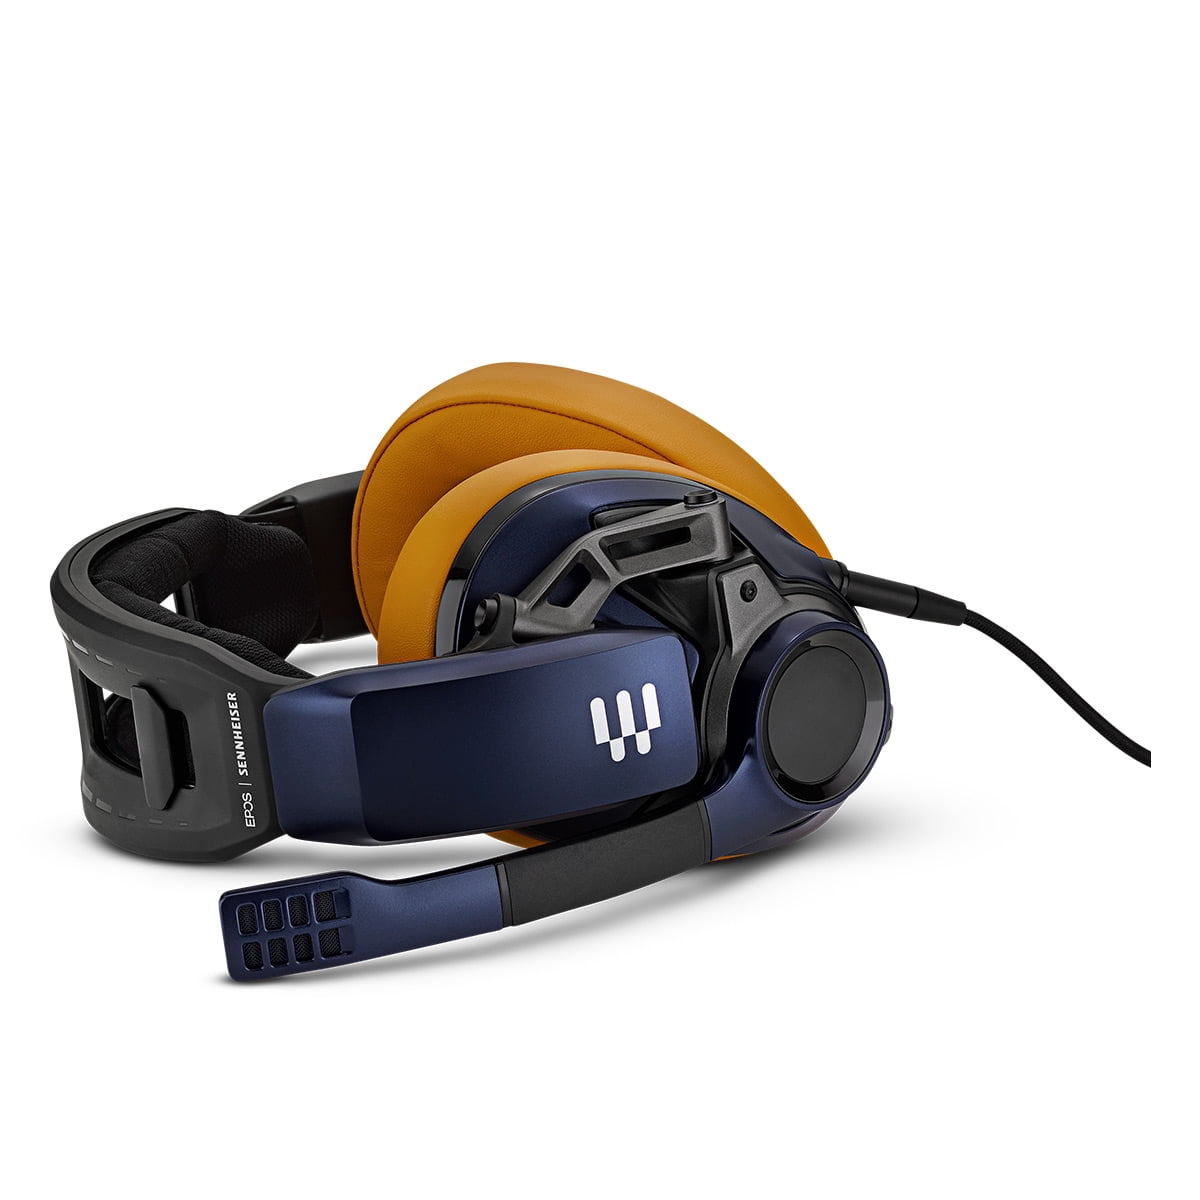 EPOS Audio GSP 602 Closed Acoustic Gaming Headset (Blue/Gold)